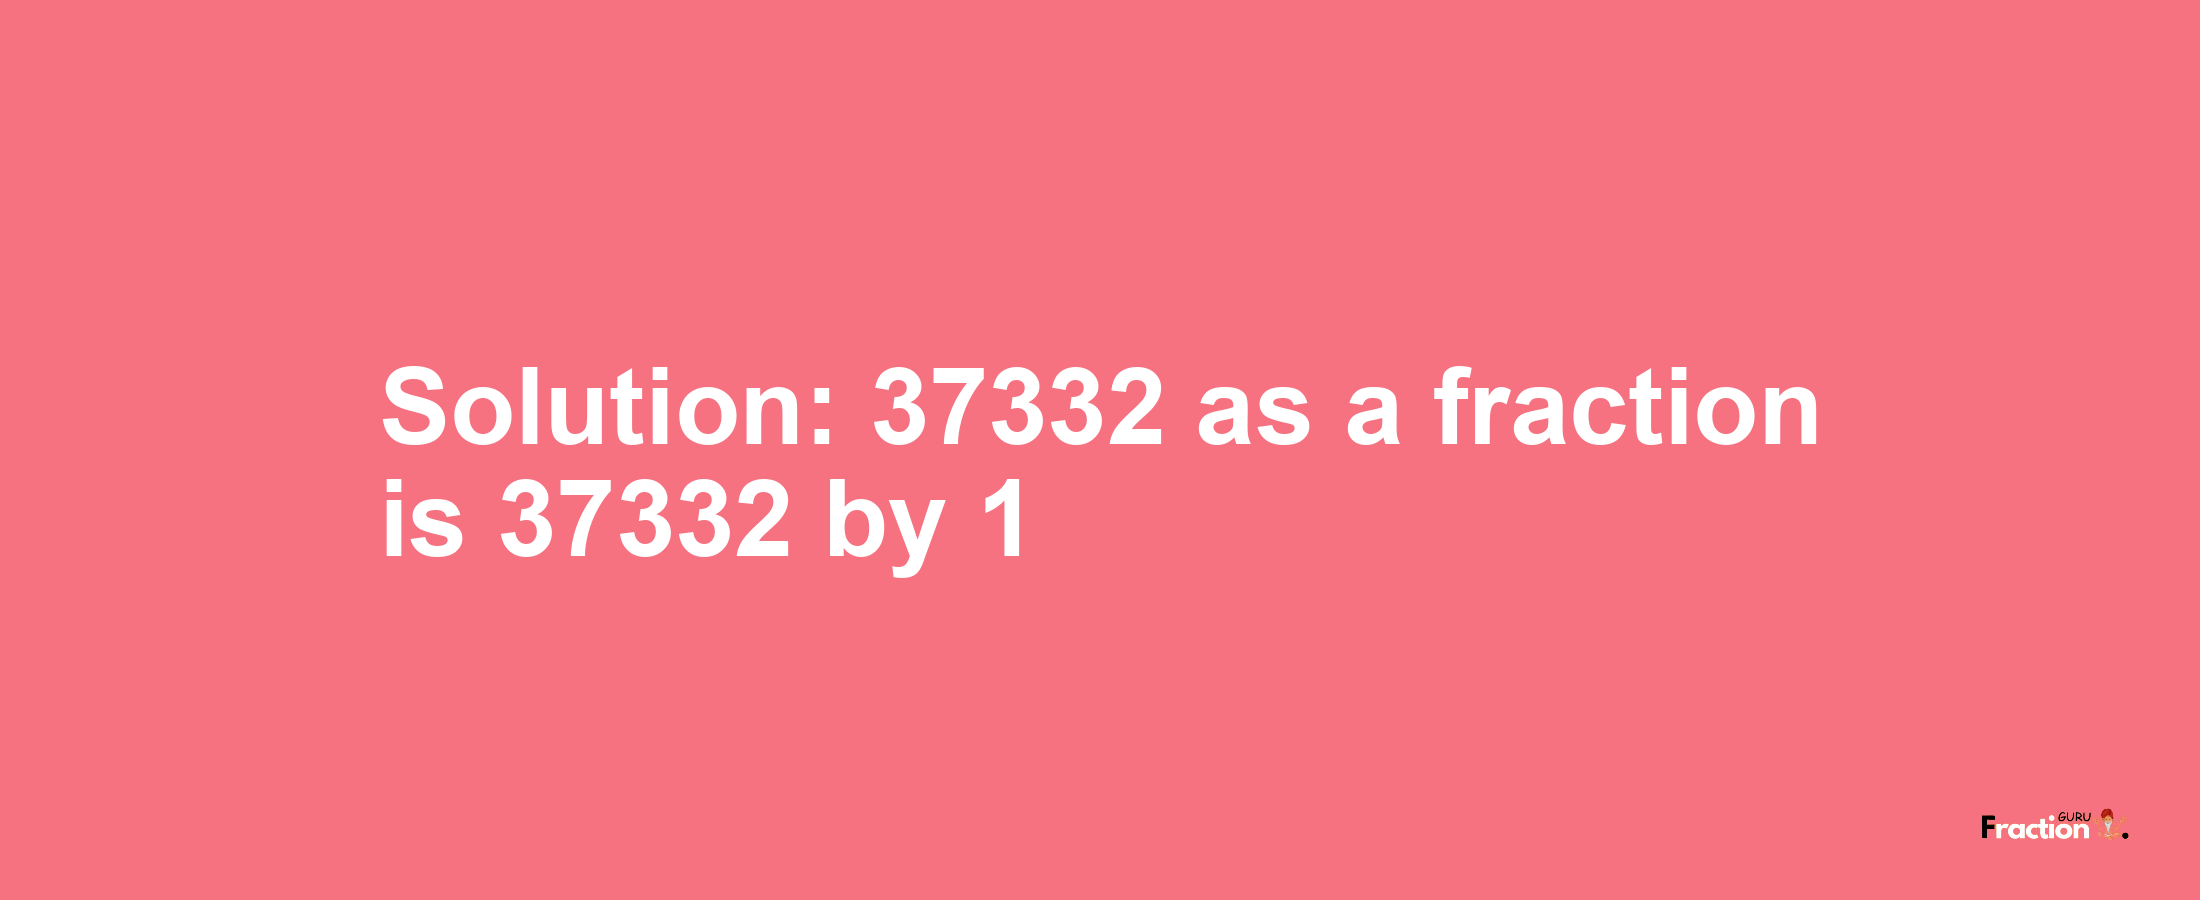 Solution:37332 as a fraction is 37332/1